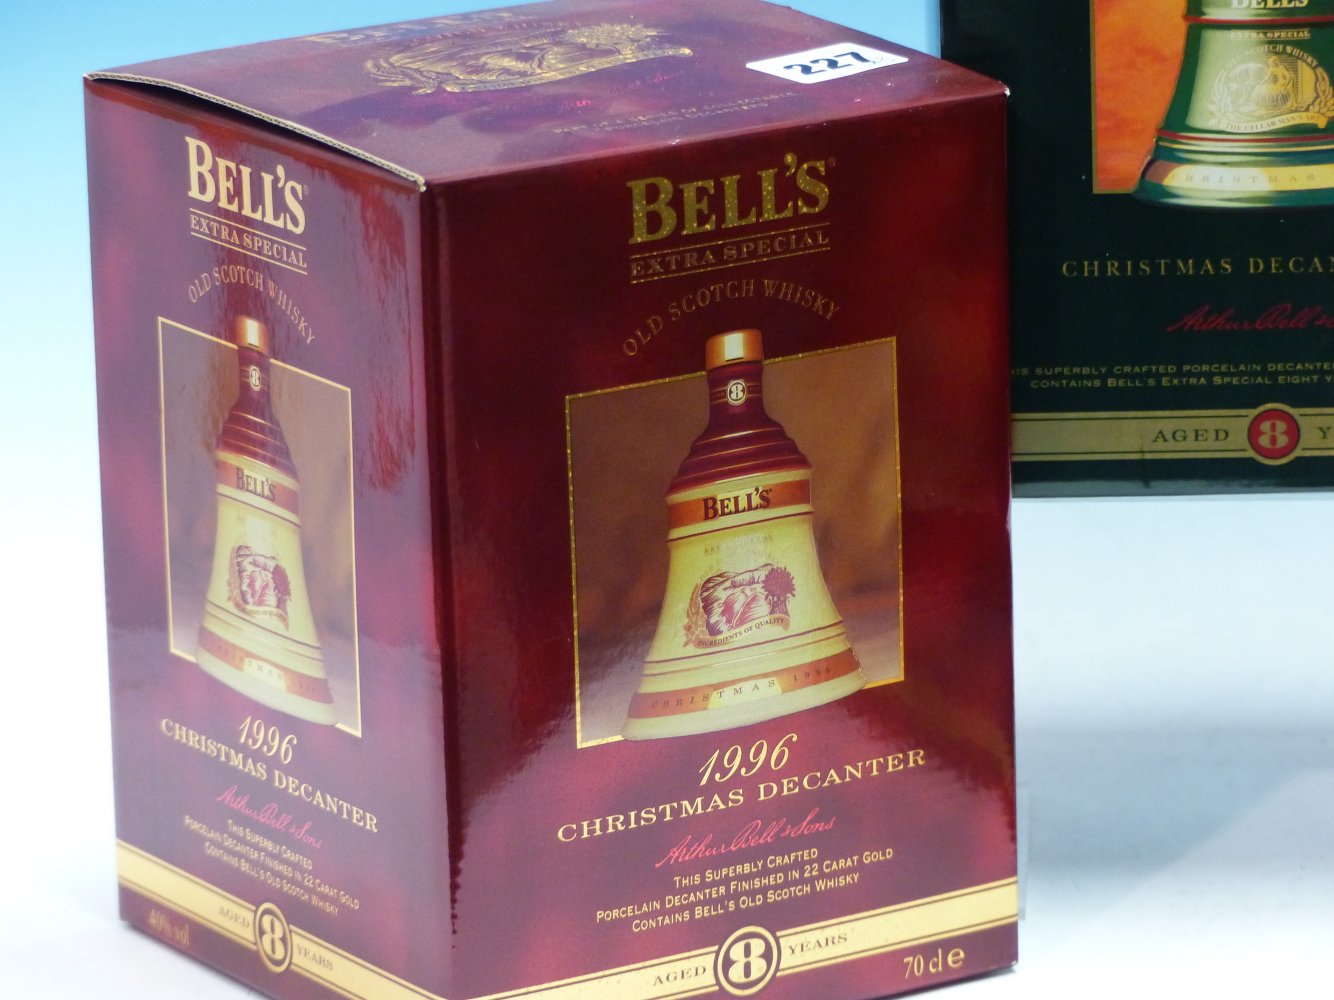 WHISKY. BELLS CHRISTMAS DECANTER 1996 EDITION, 2 x BOTTLES, BOXED TOGETHER WITH 1995, 1 x BOTTLE, - Image 2 of 4